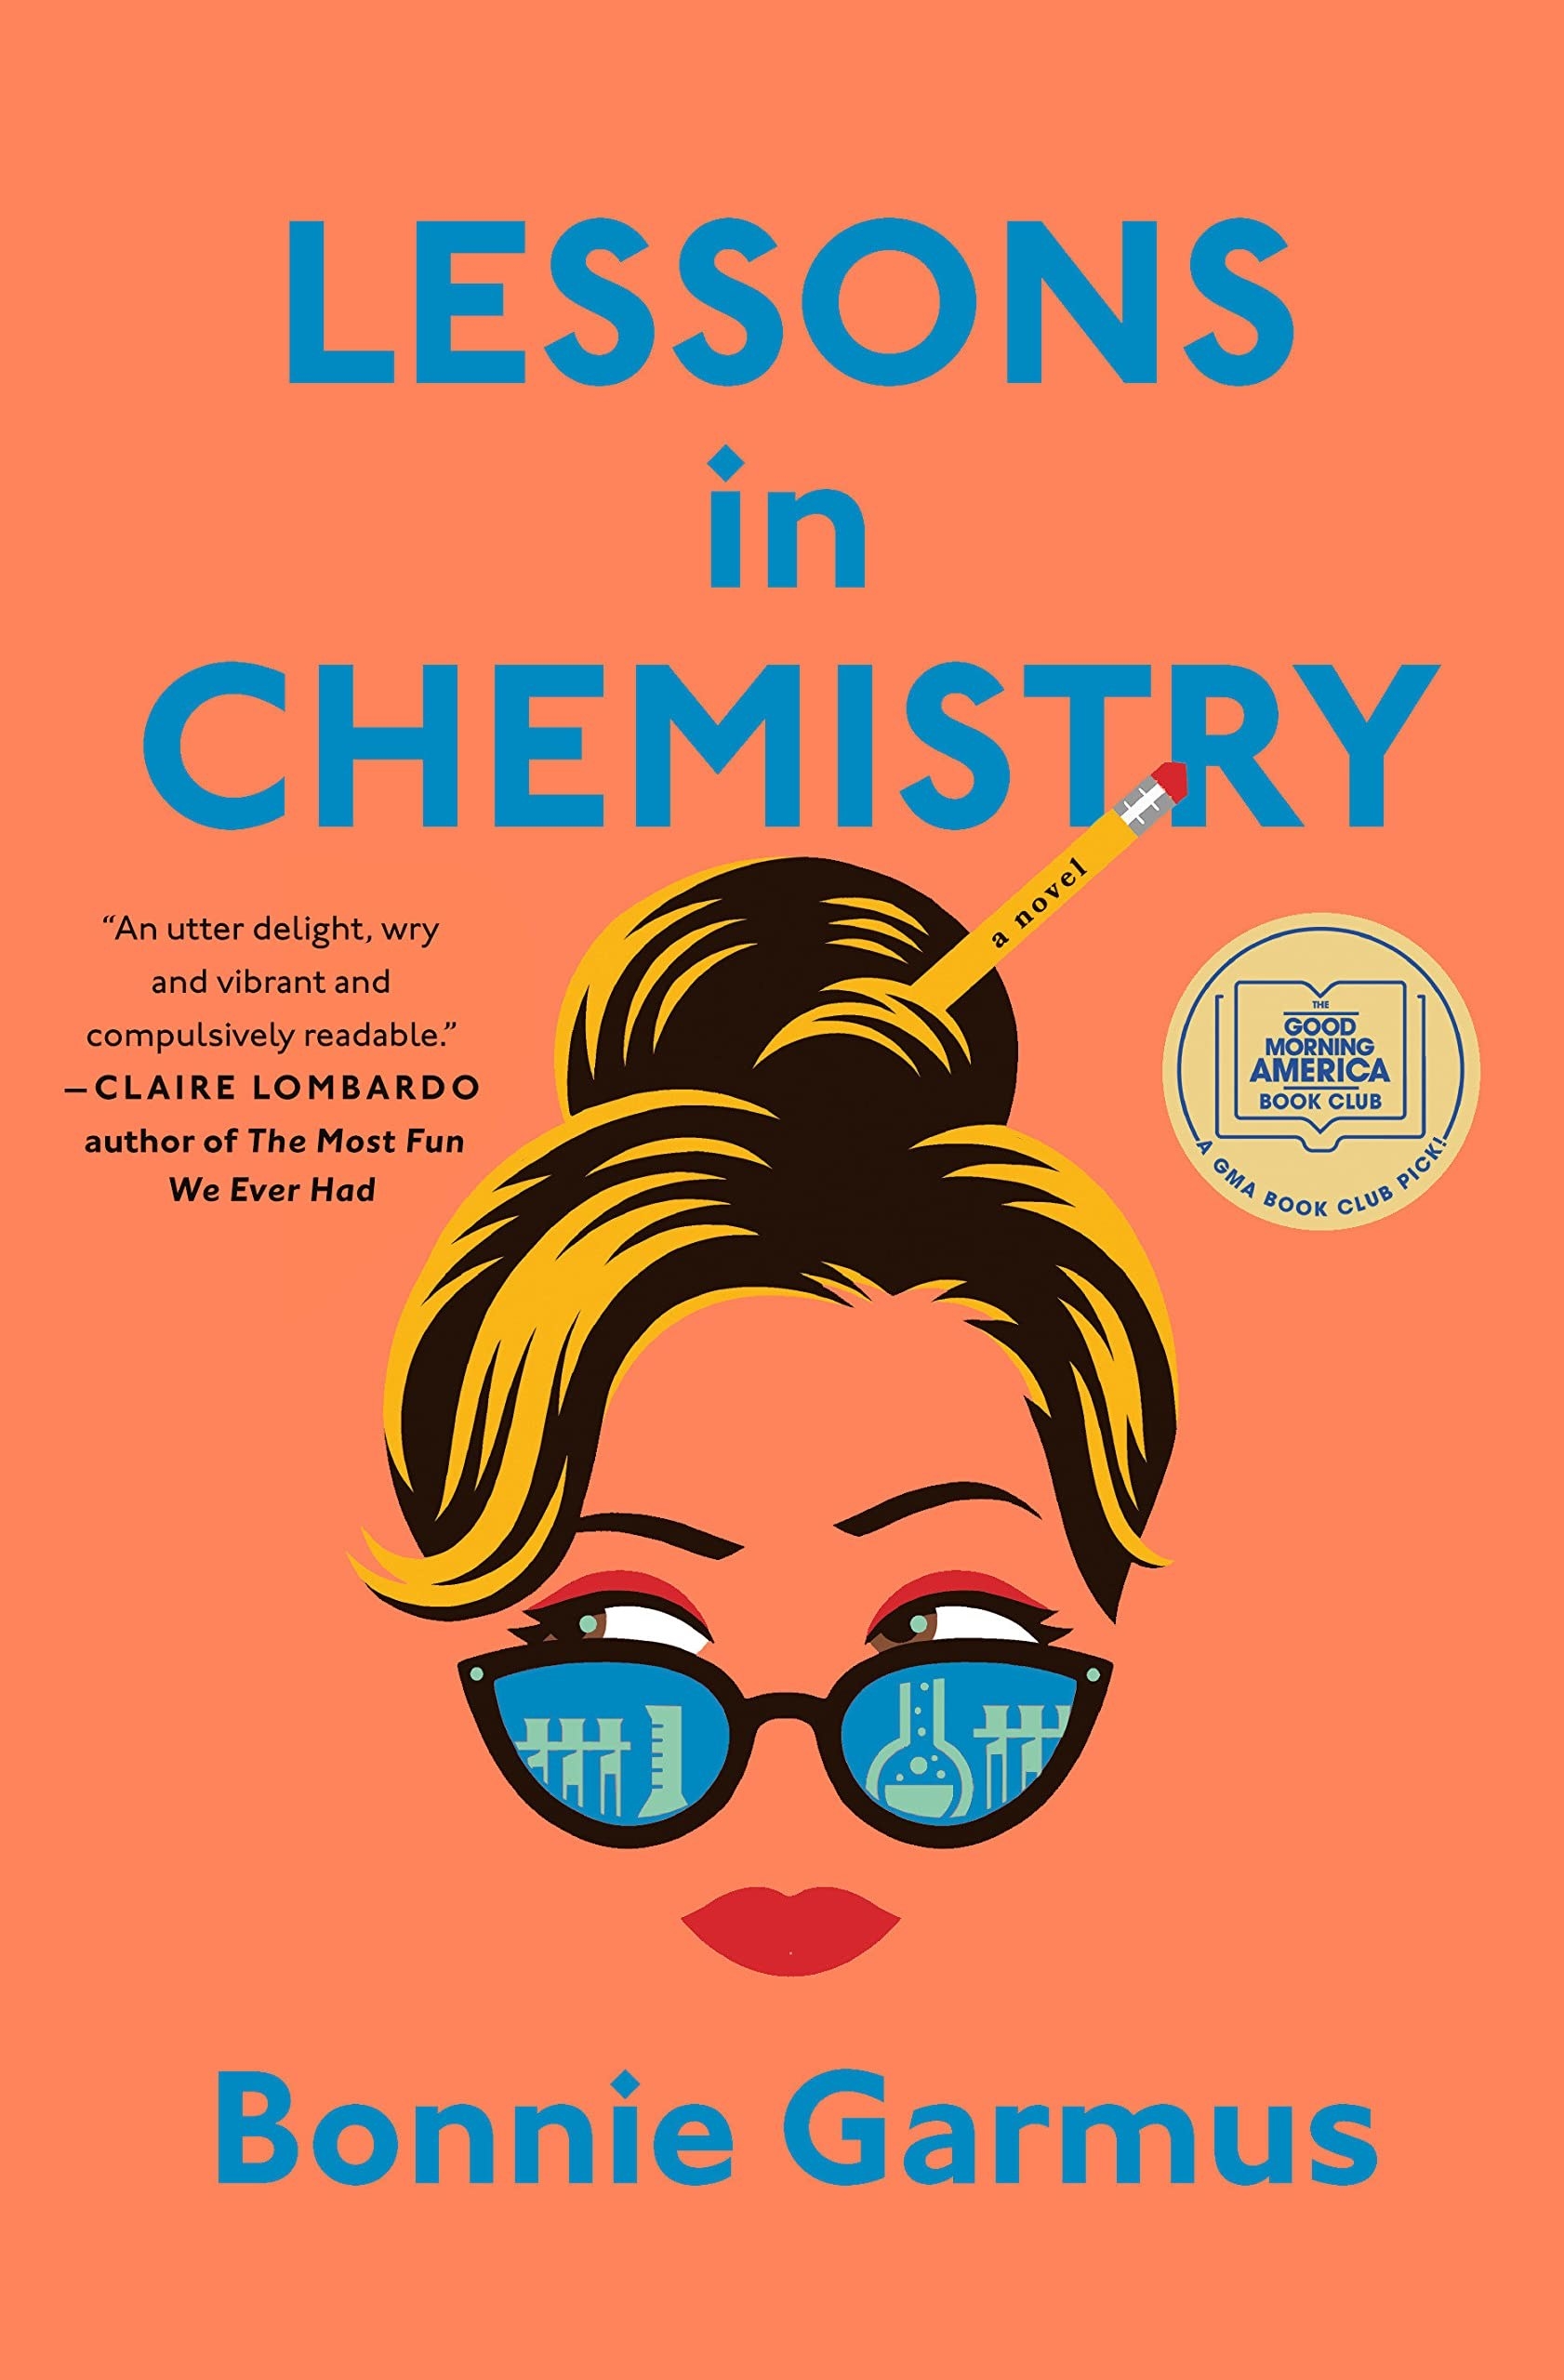 The cover of &quot;Lessons in Chemistry&quot; by Bonnie Garmus.